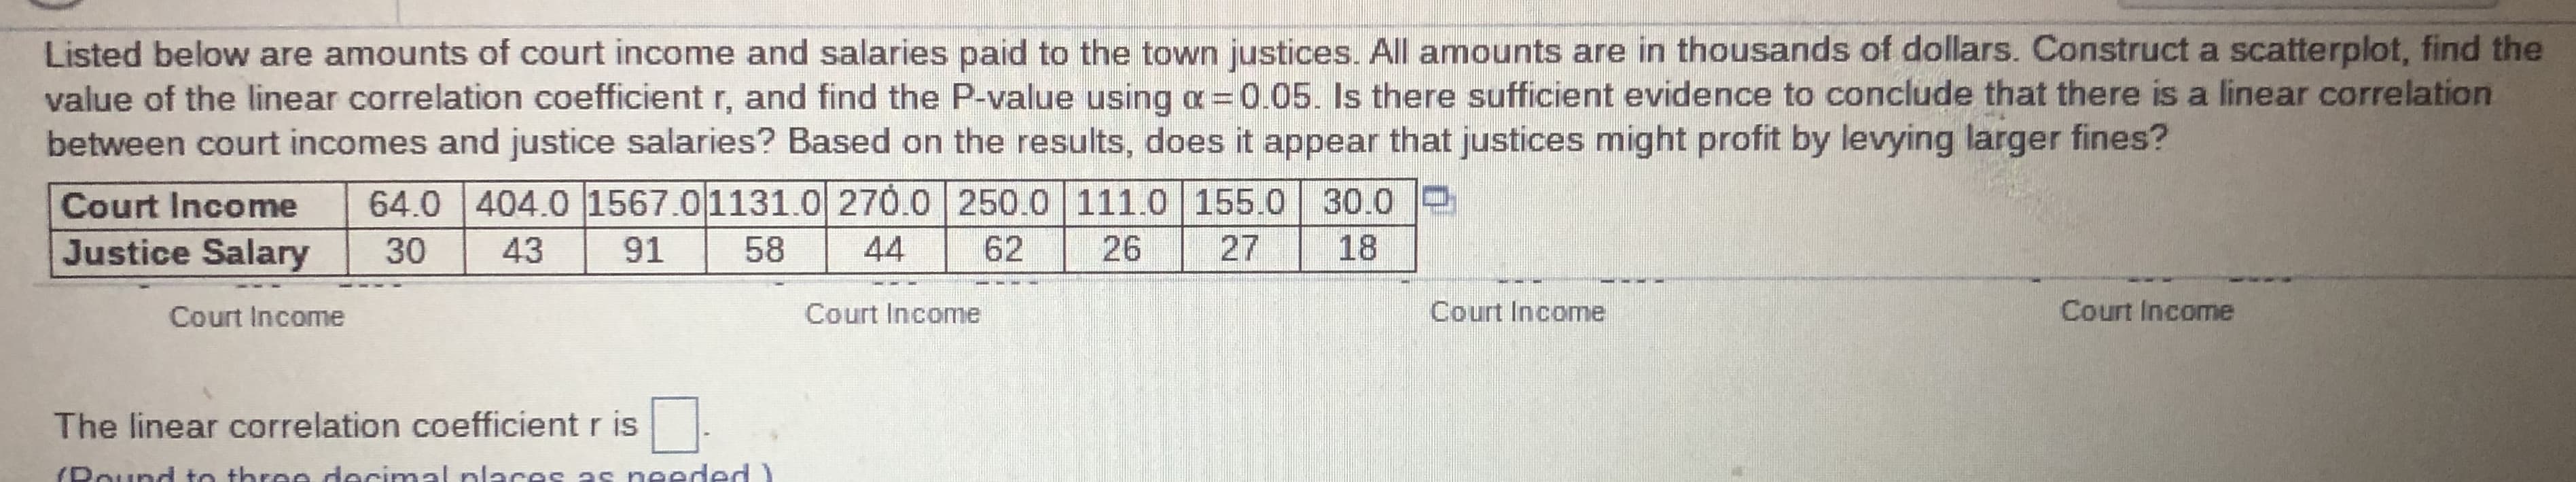 Listed below are amounts of court income and salaries paid to the town justices. All amounts are in thousands of dollars. Construct a scatterplot, find the
value of the linear correlation coefficient r, and find the P-value using a=0.05. Is there sufficient evidence to conclude that there is a linear correlation
between court incomes and justice salaries? Based on the results, does it appear that justices might profit by levying larger fines?
Court Income
64.0 404.0 1567.01131.0 270.0 250.0 111.0 155.0 30.0 P
Justice Salary
30
43
91
58
44
62
26
27
18
Court Income
Court Income
Court Income
Court Income
The linear correlation coefficient r is
